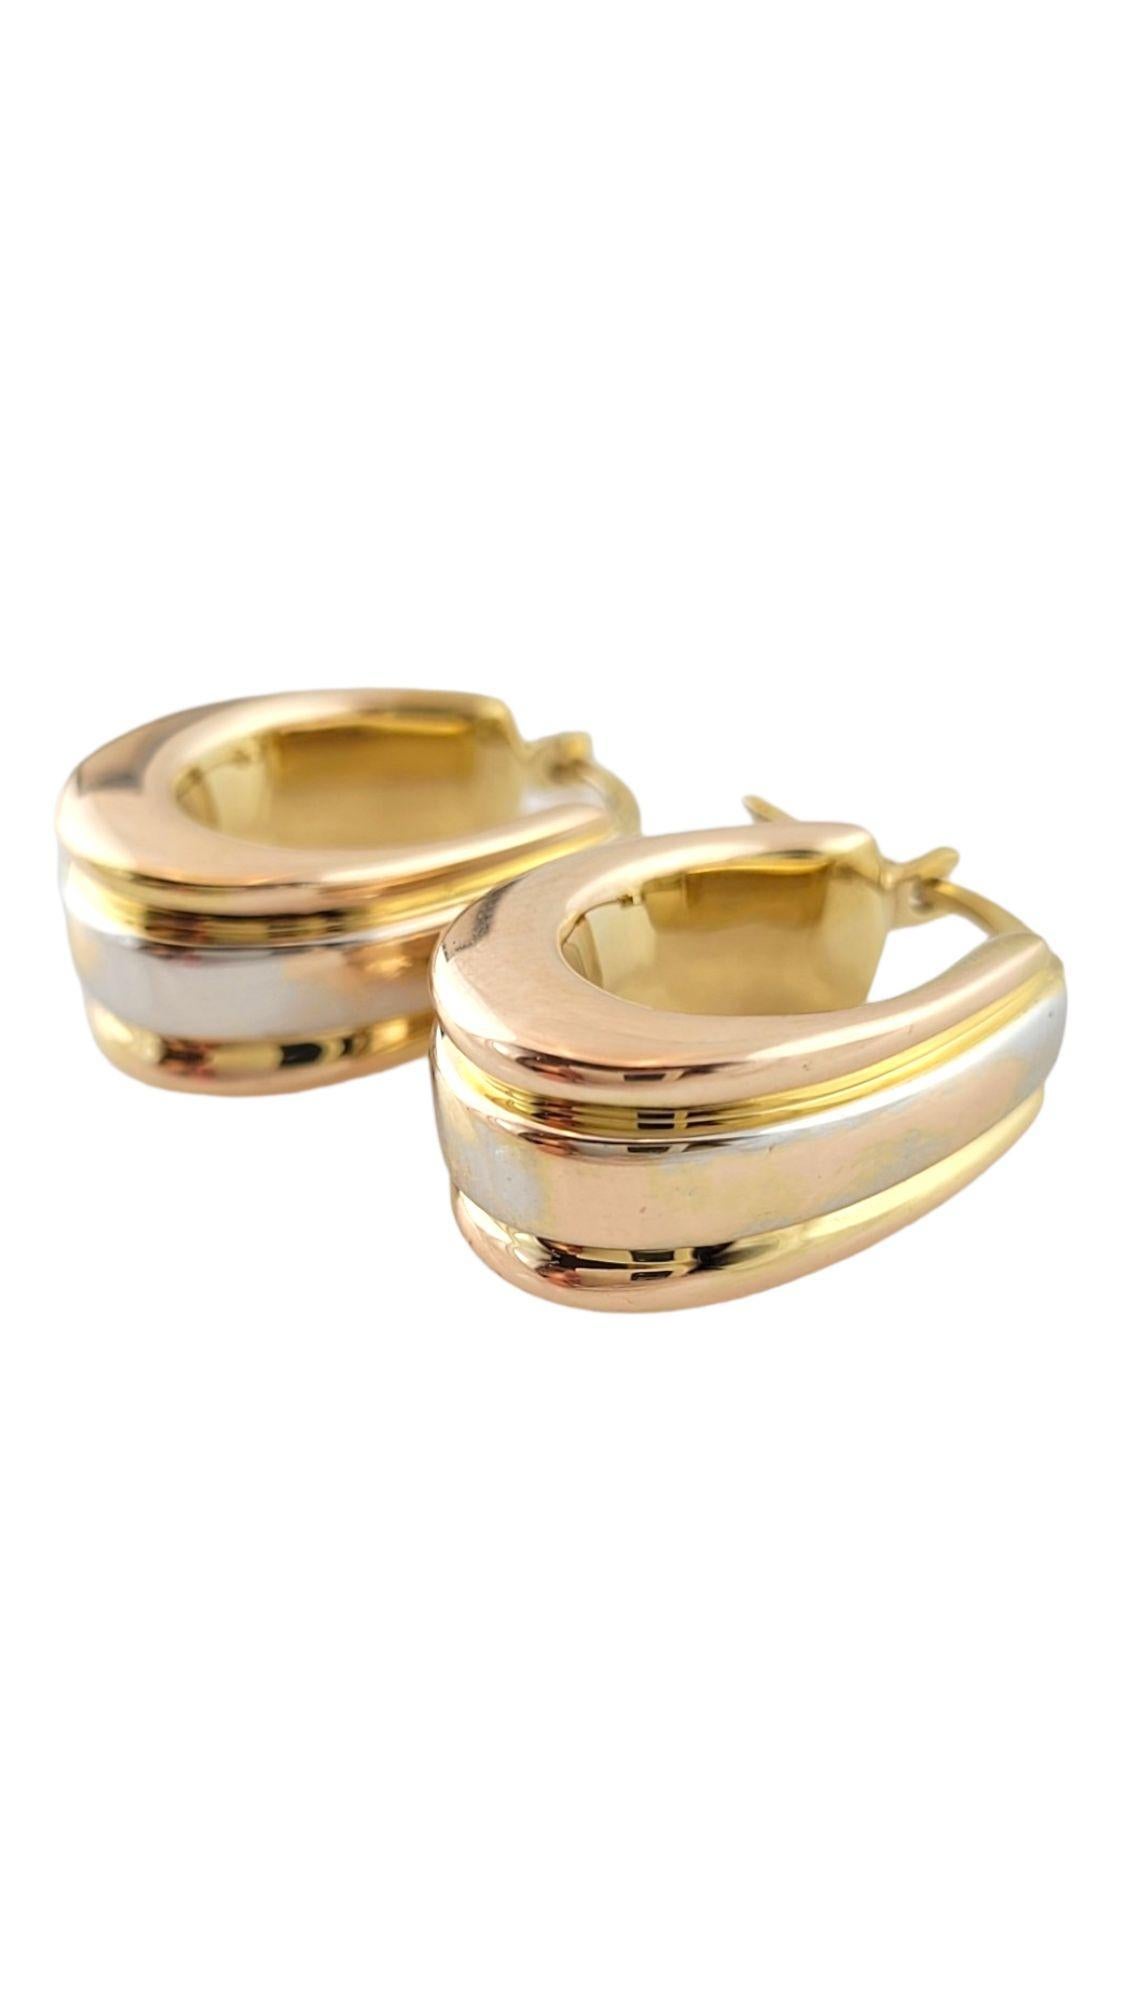 Vintage 14K Yellow and White Gold Huggies

These gorgeous huggies are crafted from 14K yellow and white gold!

Size: 20.4mm X 14.0mm X 9.0mm

Weight: 3.37 g/ 2.2 dwt

Hallmark: 14K ITALY 585

Very good condition, professionally polished.

Will come